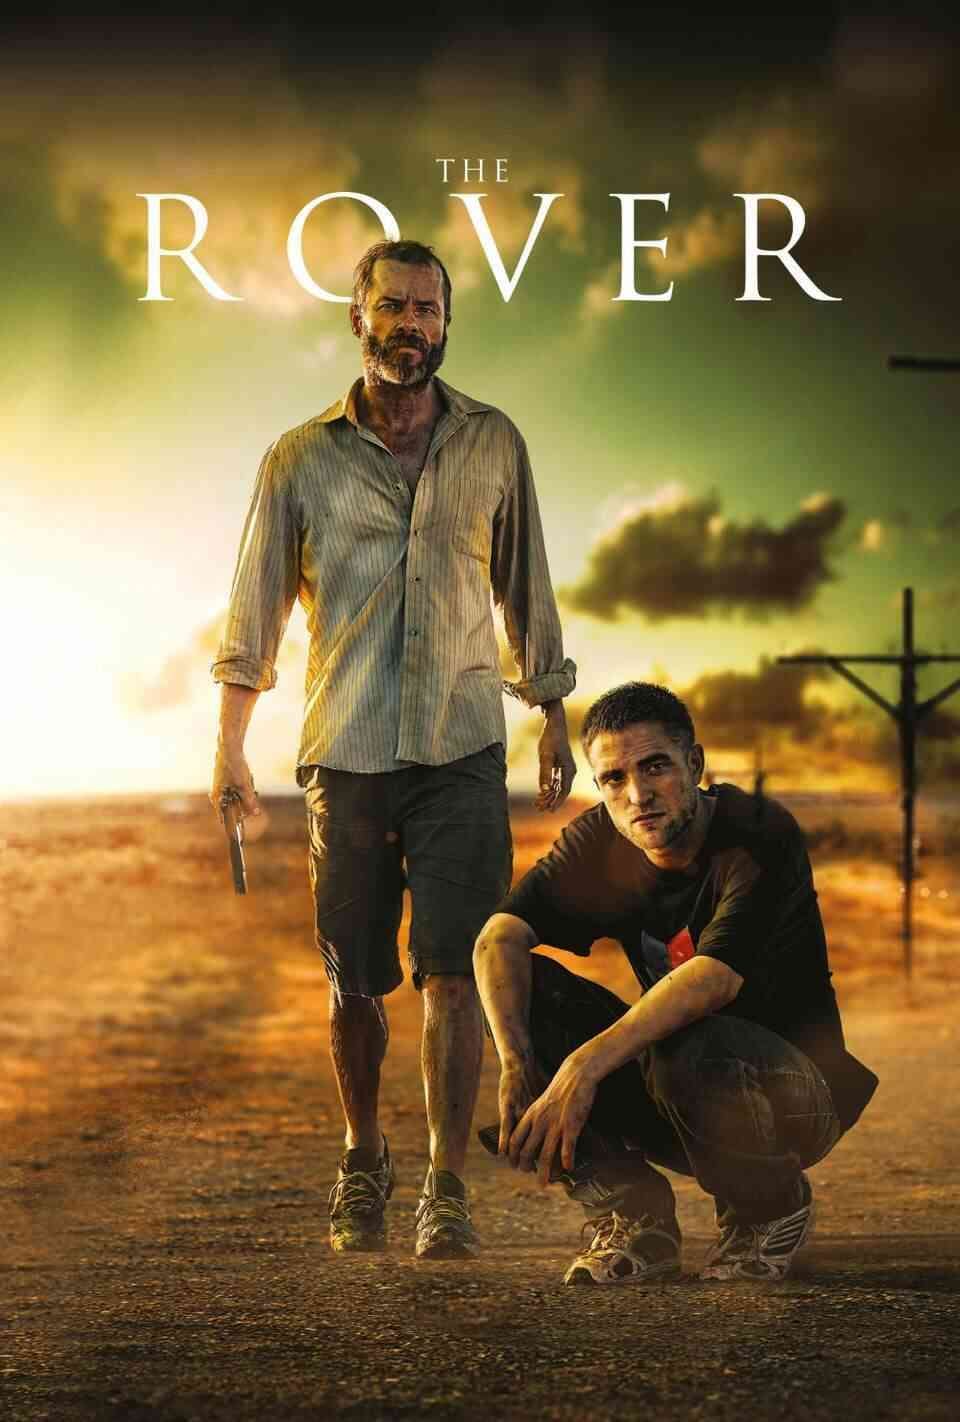 Read The Rover screenplay.